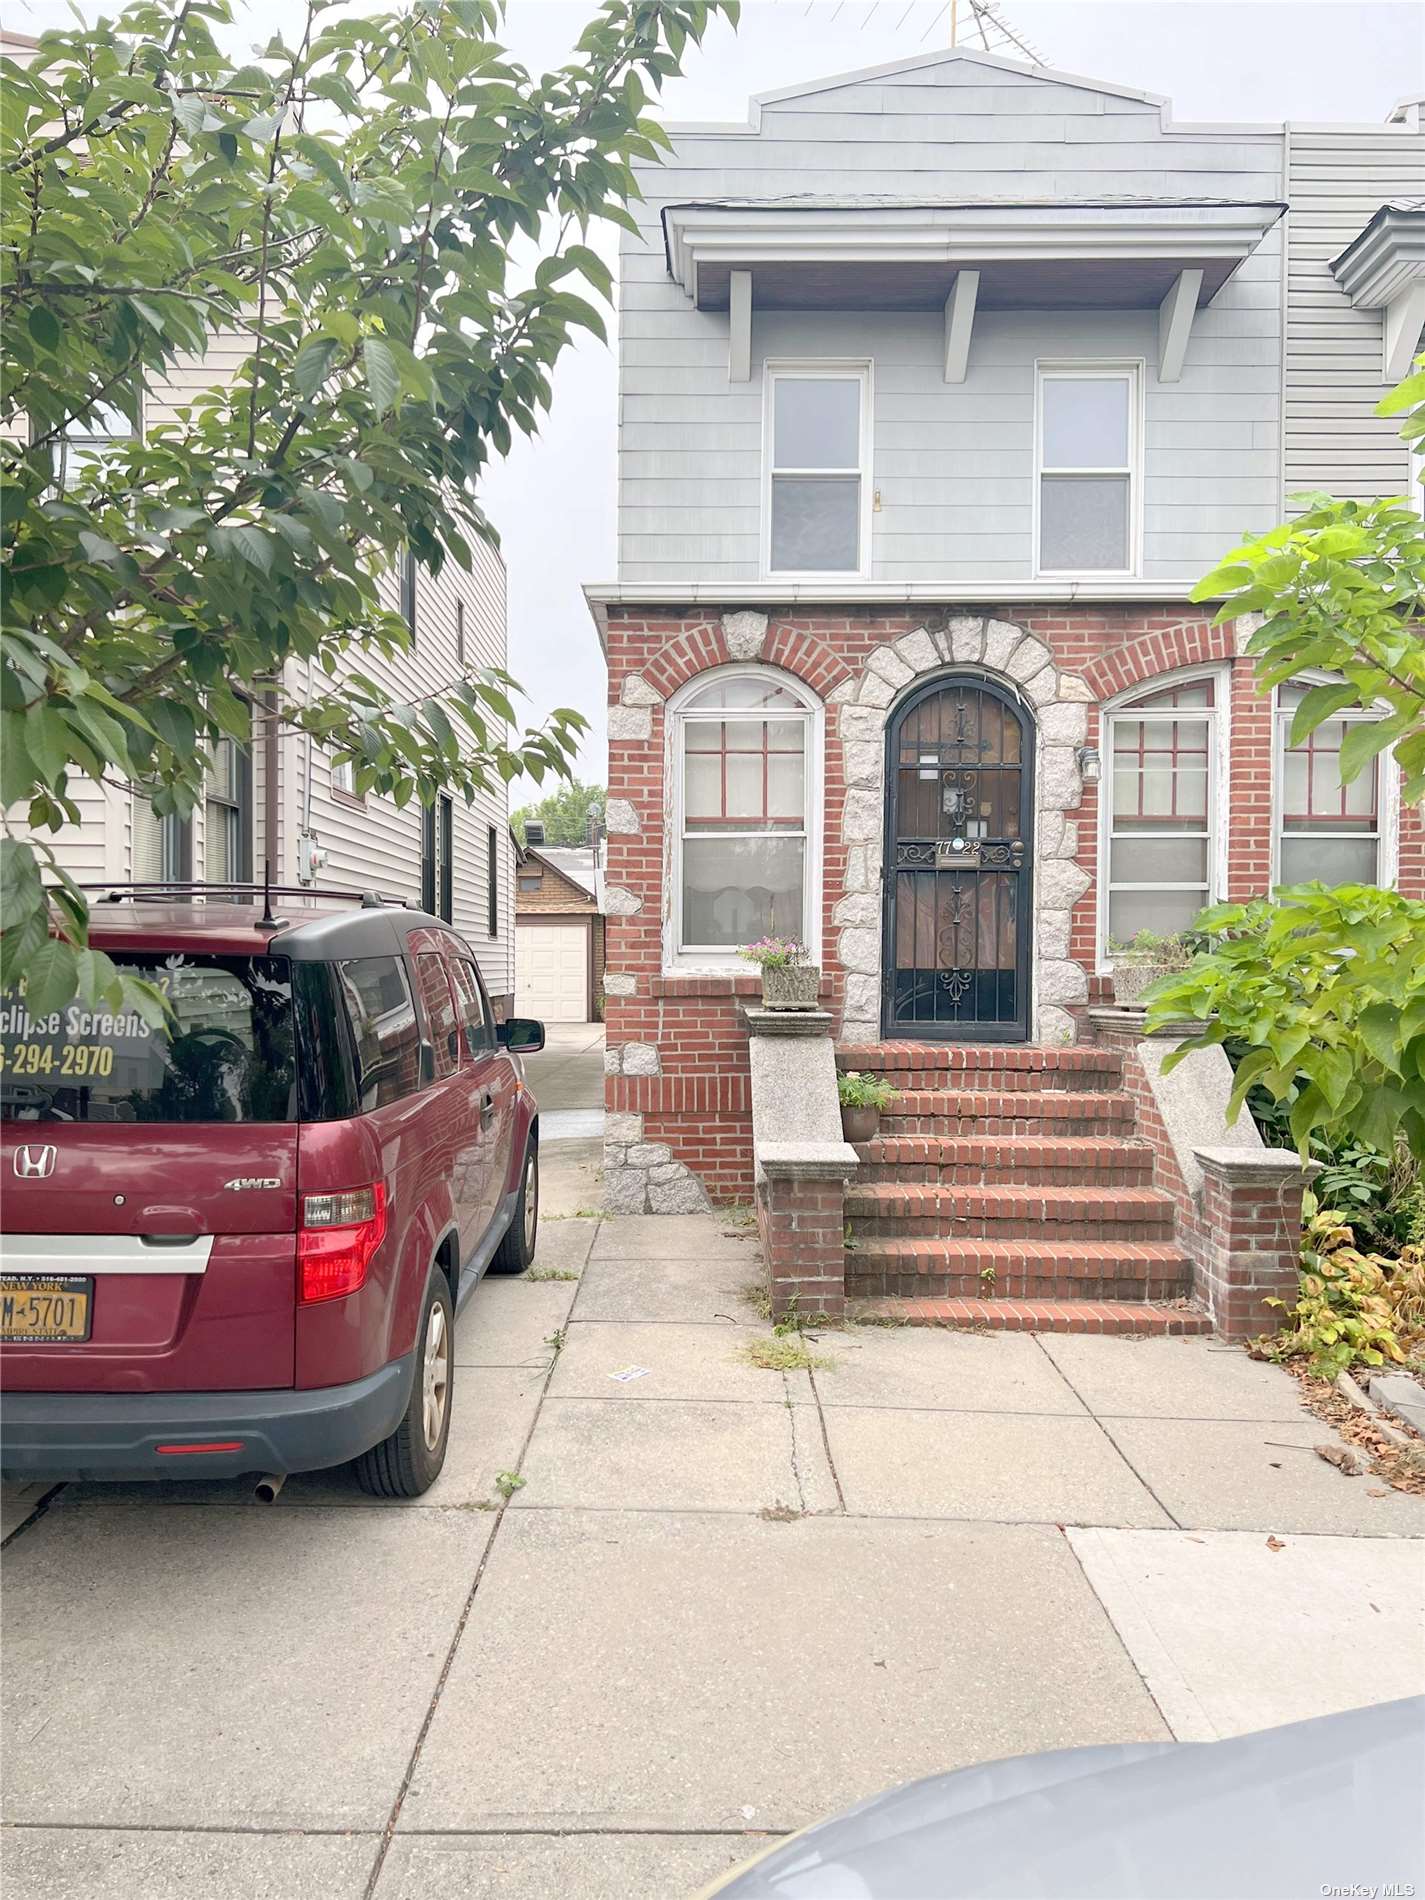 Single Family in Glendale - 62nd  Queens, NY 11385